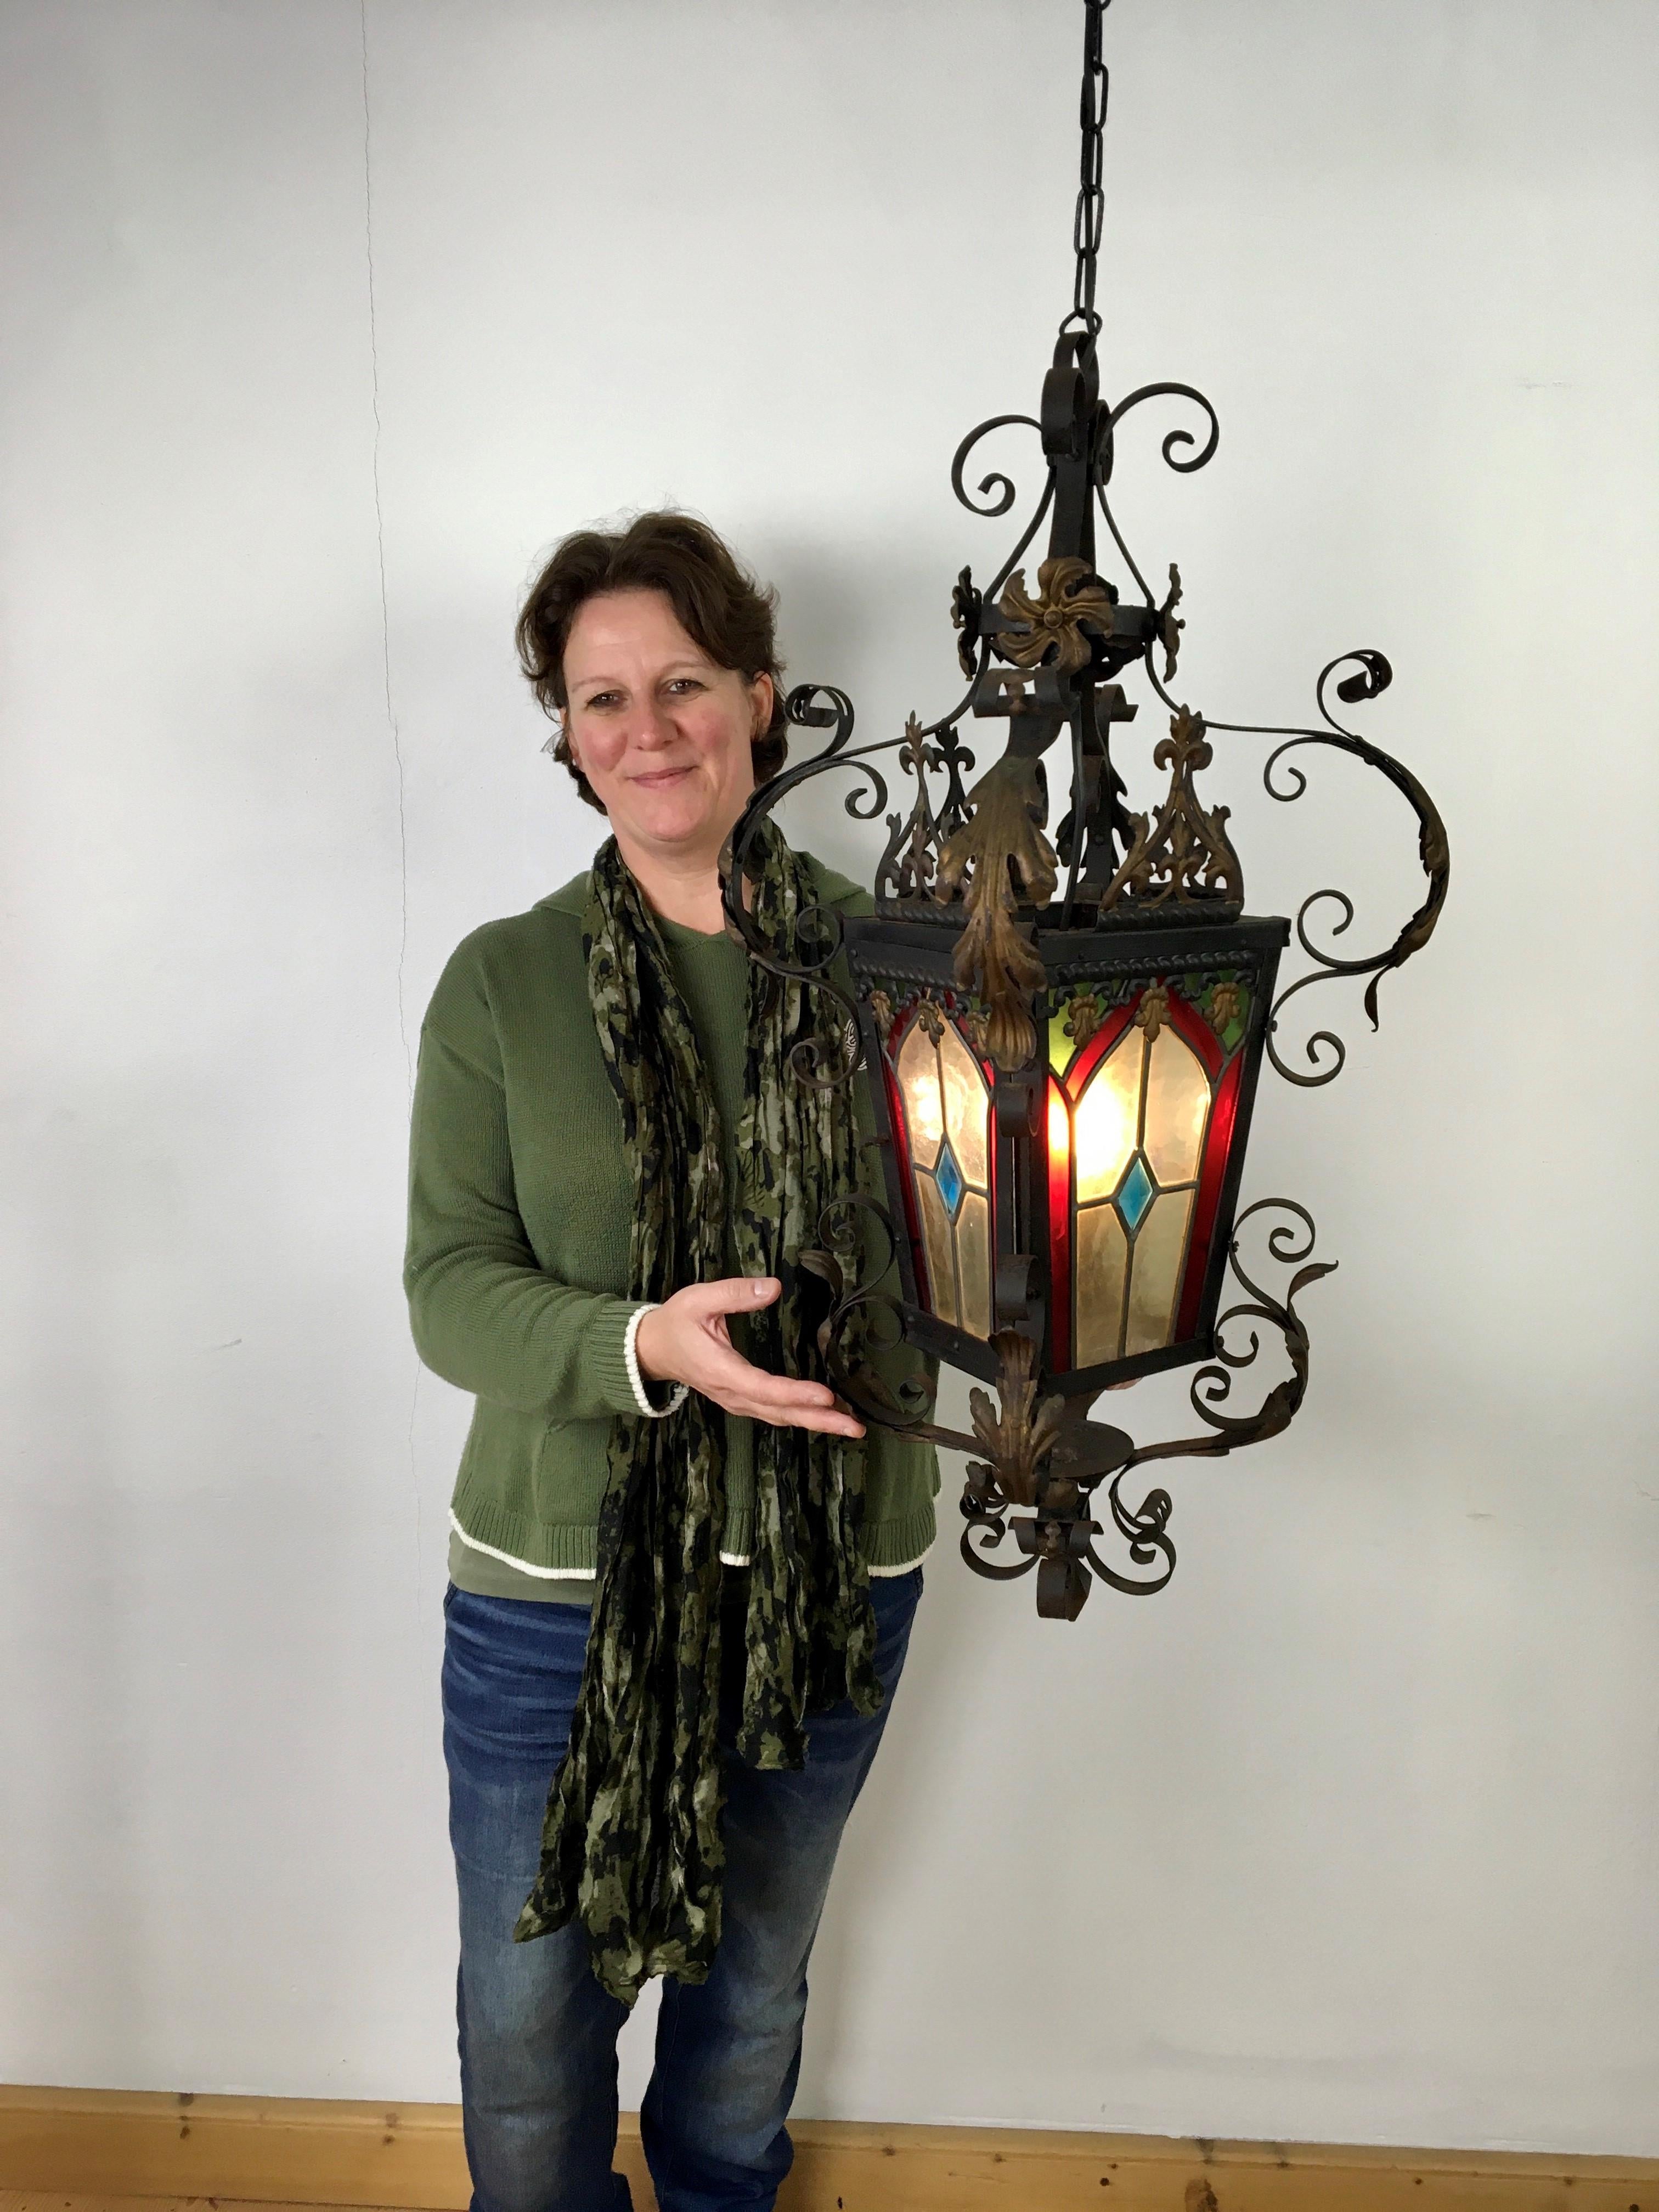 Antique lantern with colored stained glass - leaded glass 
A wrought iron French candle lantern from the Early 20th century.
The iron frame has a black painted finish with gold - bronze colored leaves, flowers  and details around. Stained glass in